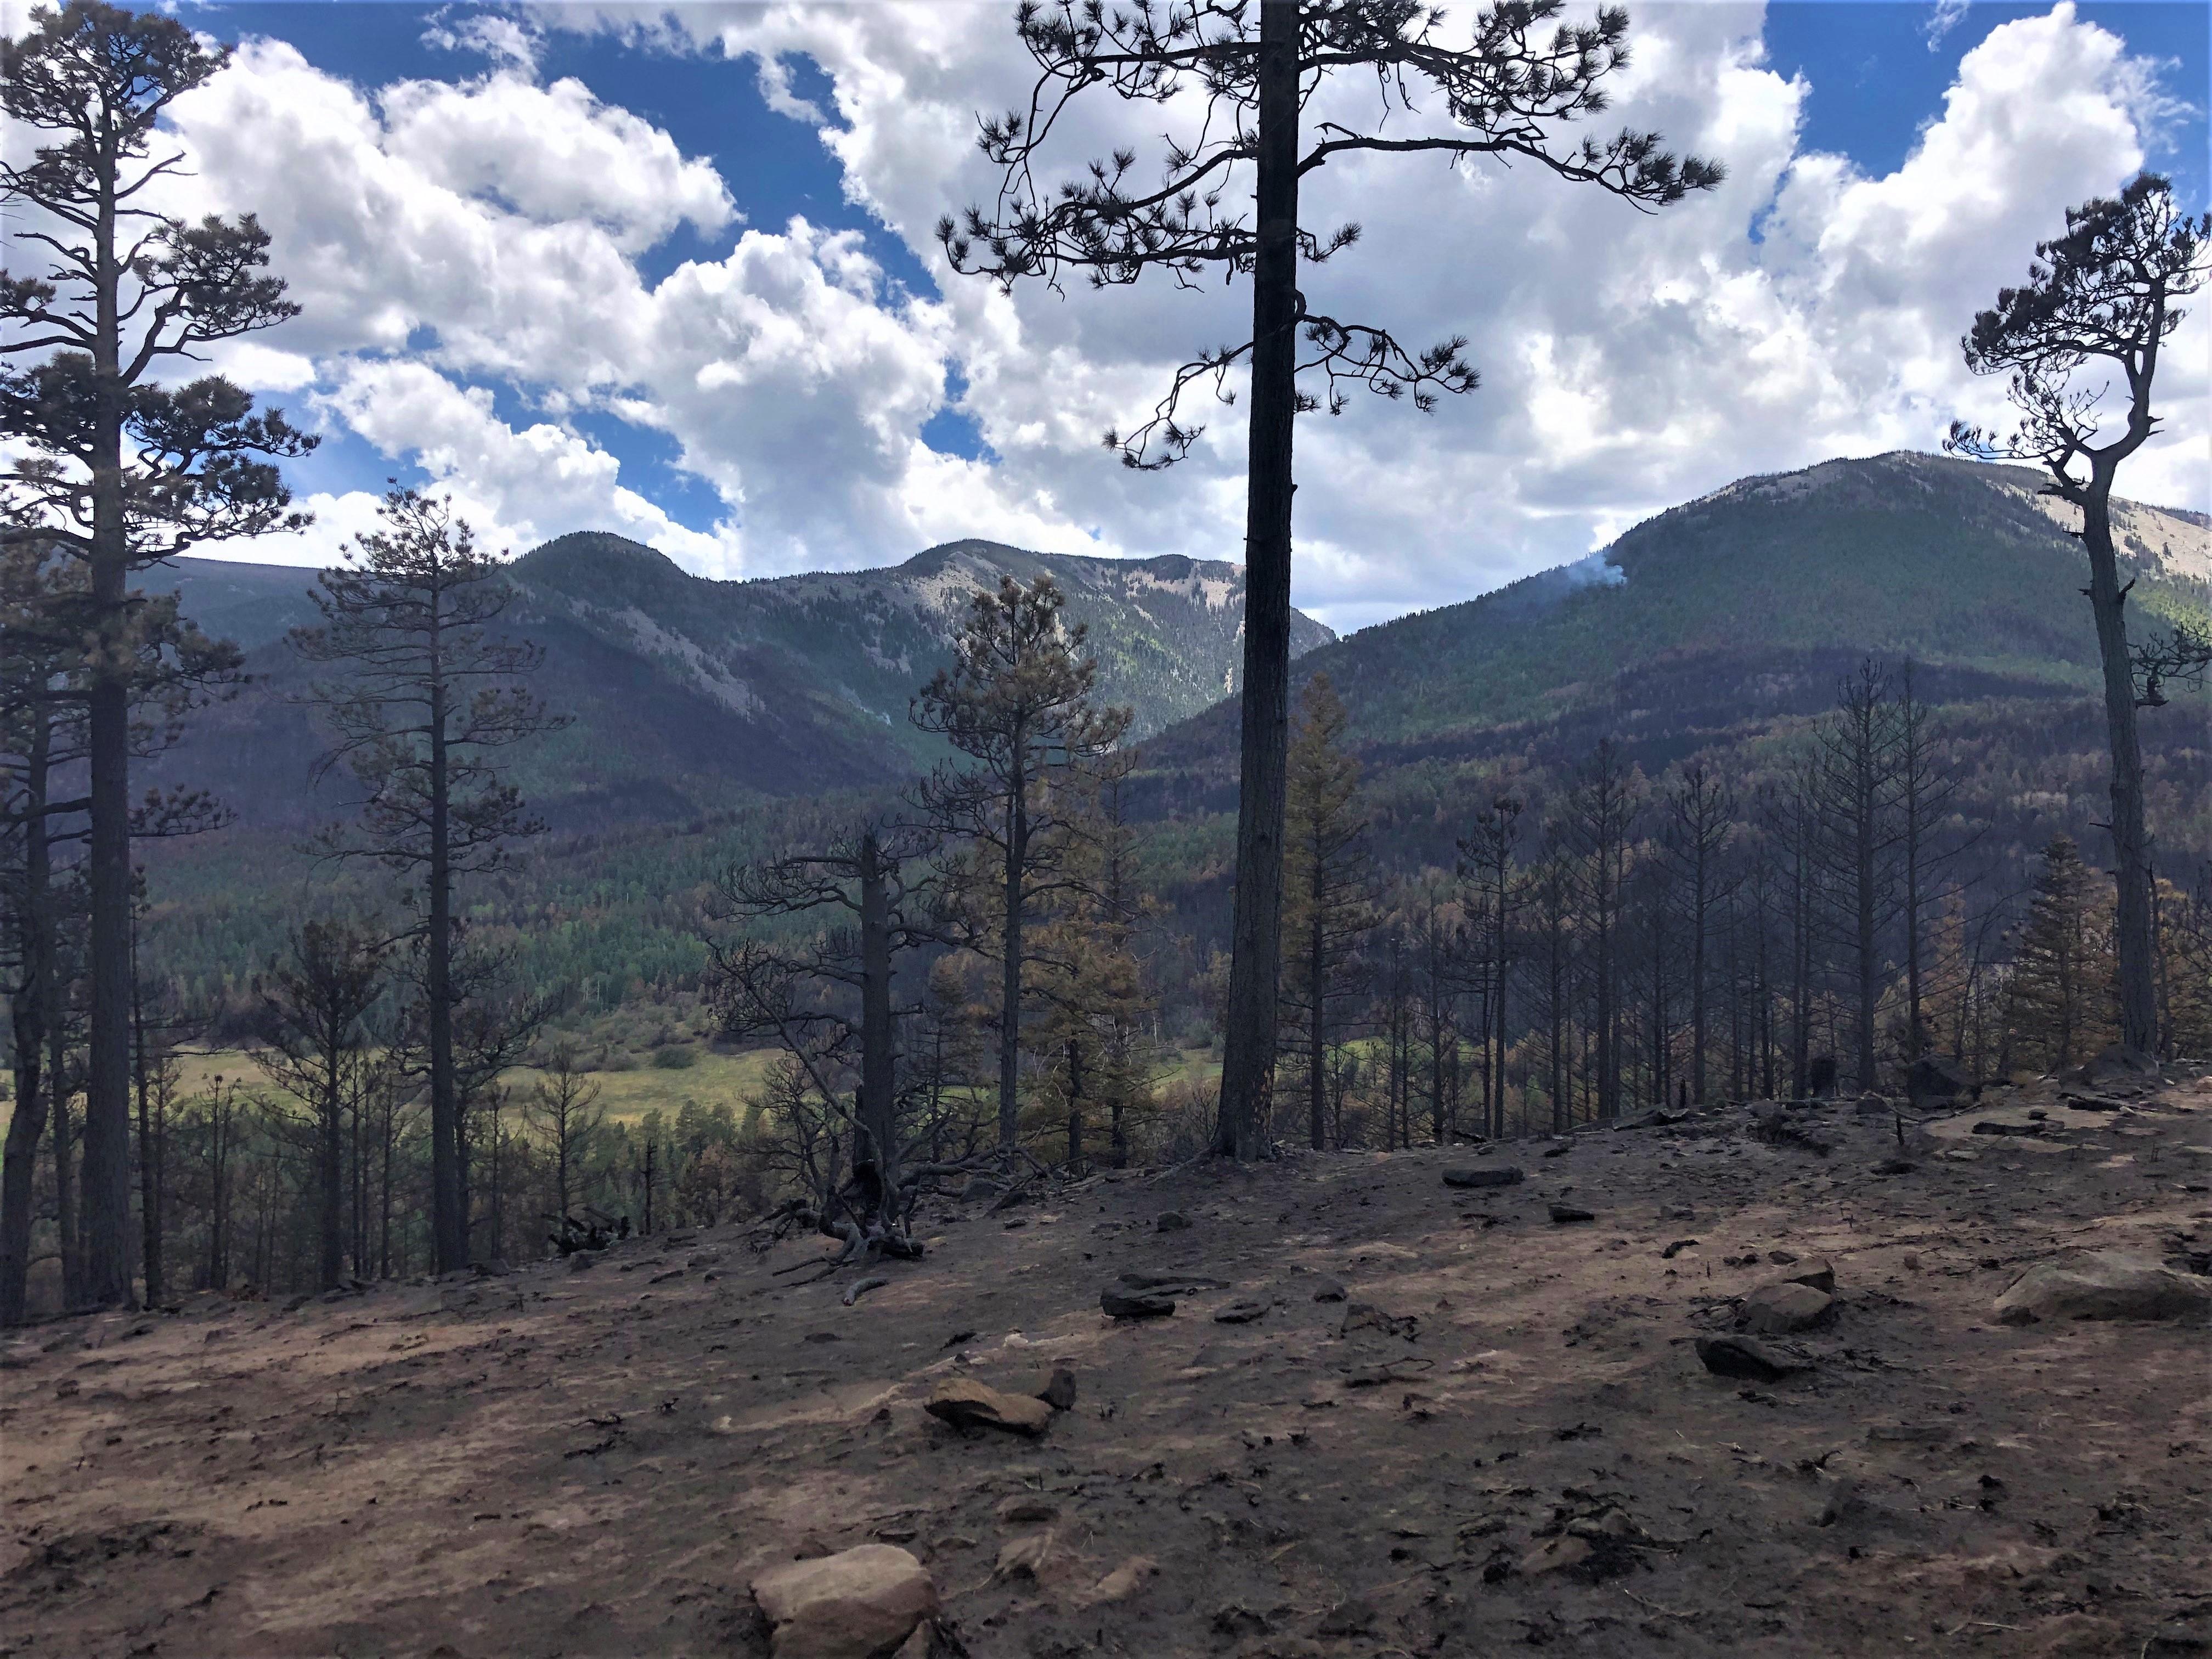 Image showing Overview of Burned Landscape within Hermits Peak-Calf Canyon Fire Perimeter